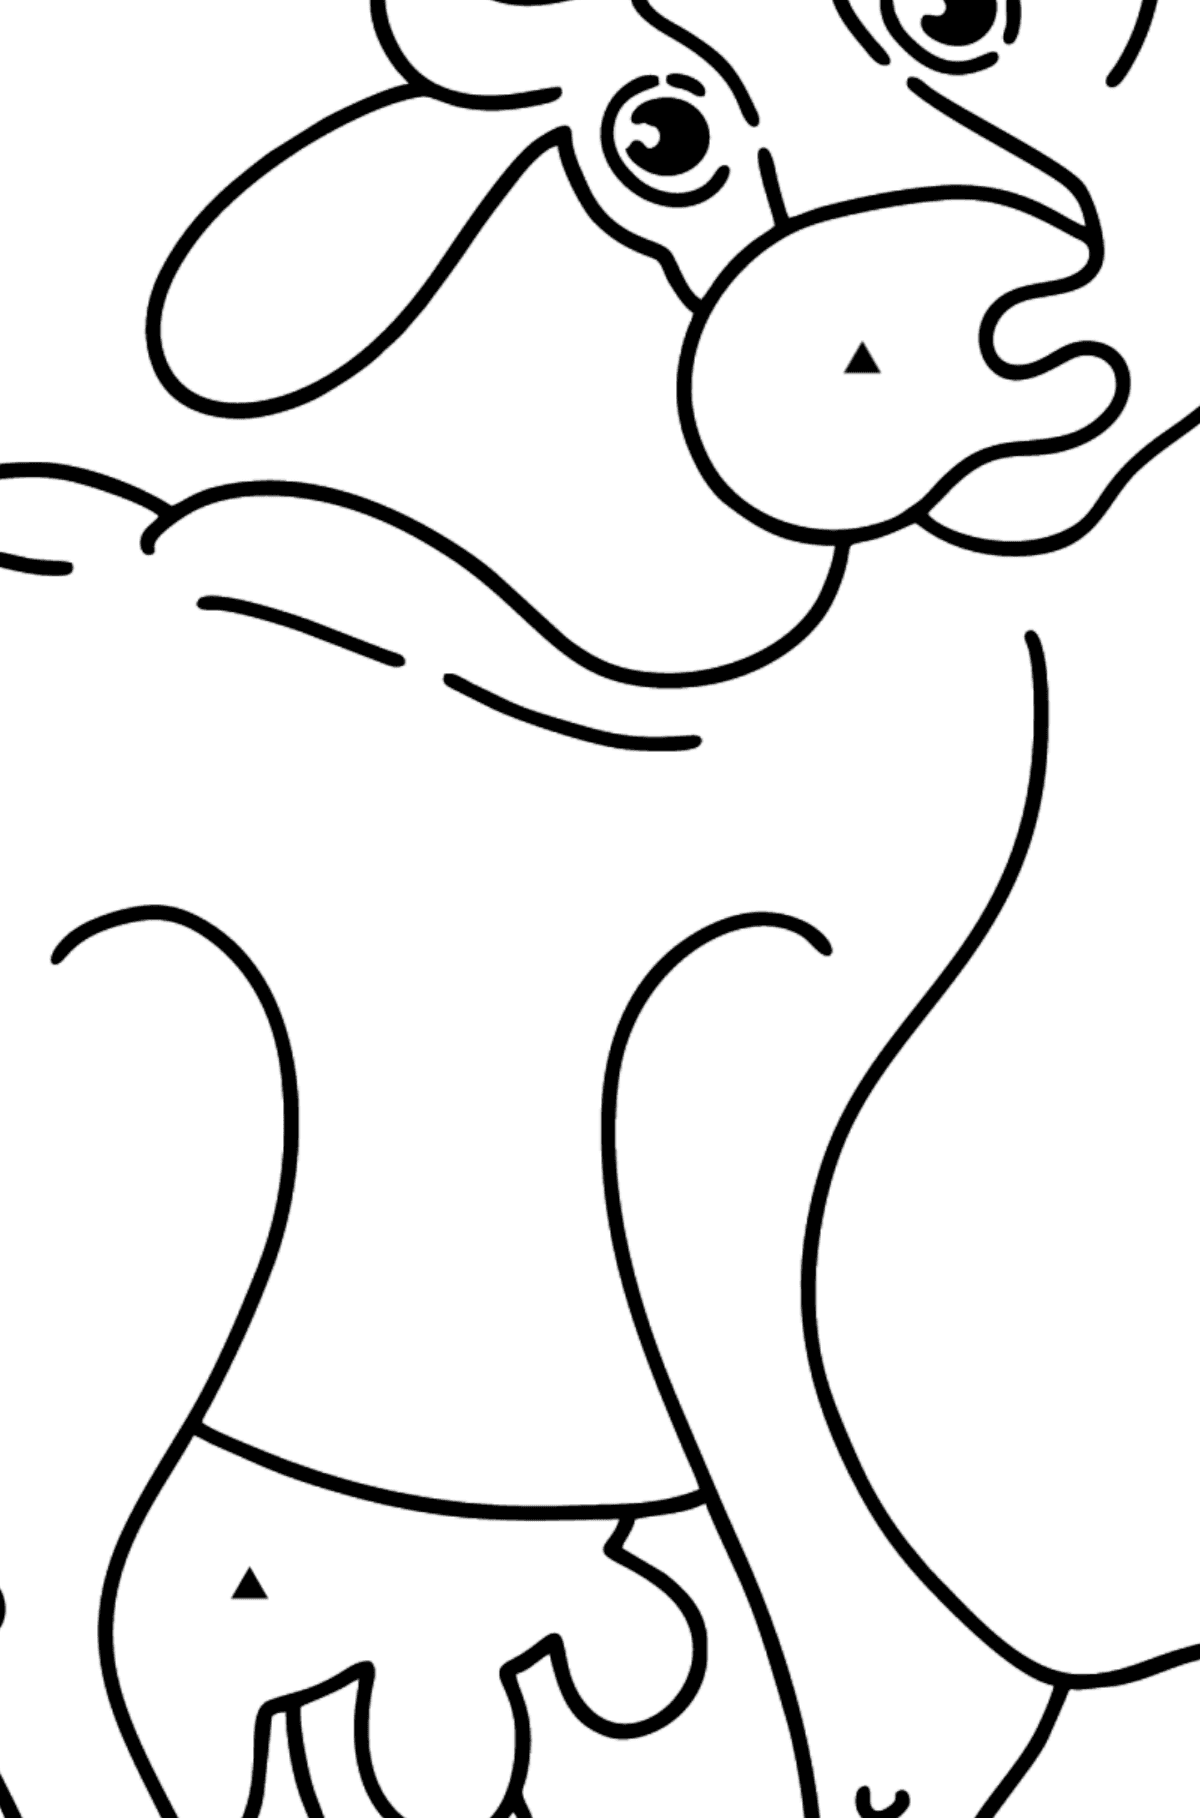 Cow coloring page - Coloring by Symbols and Geometric Shapes for Kids